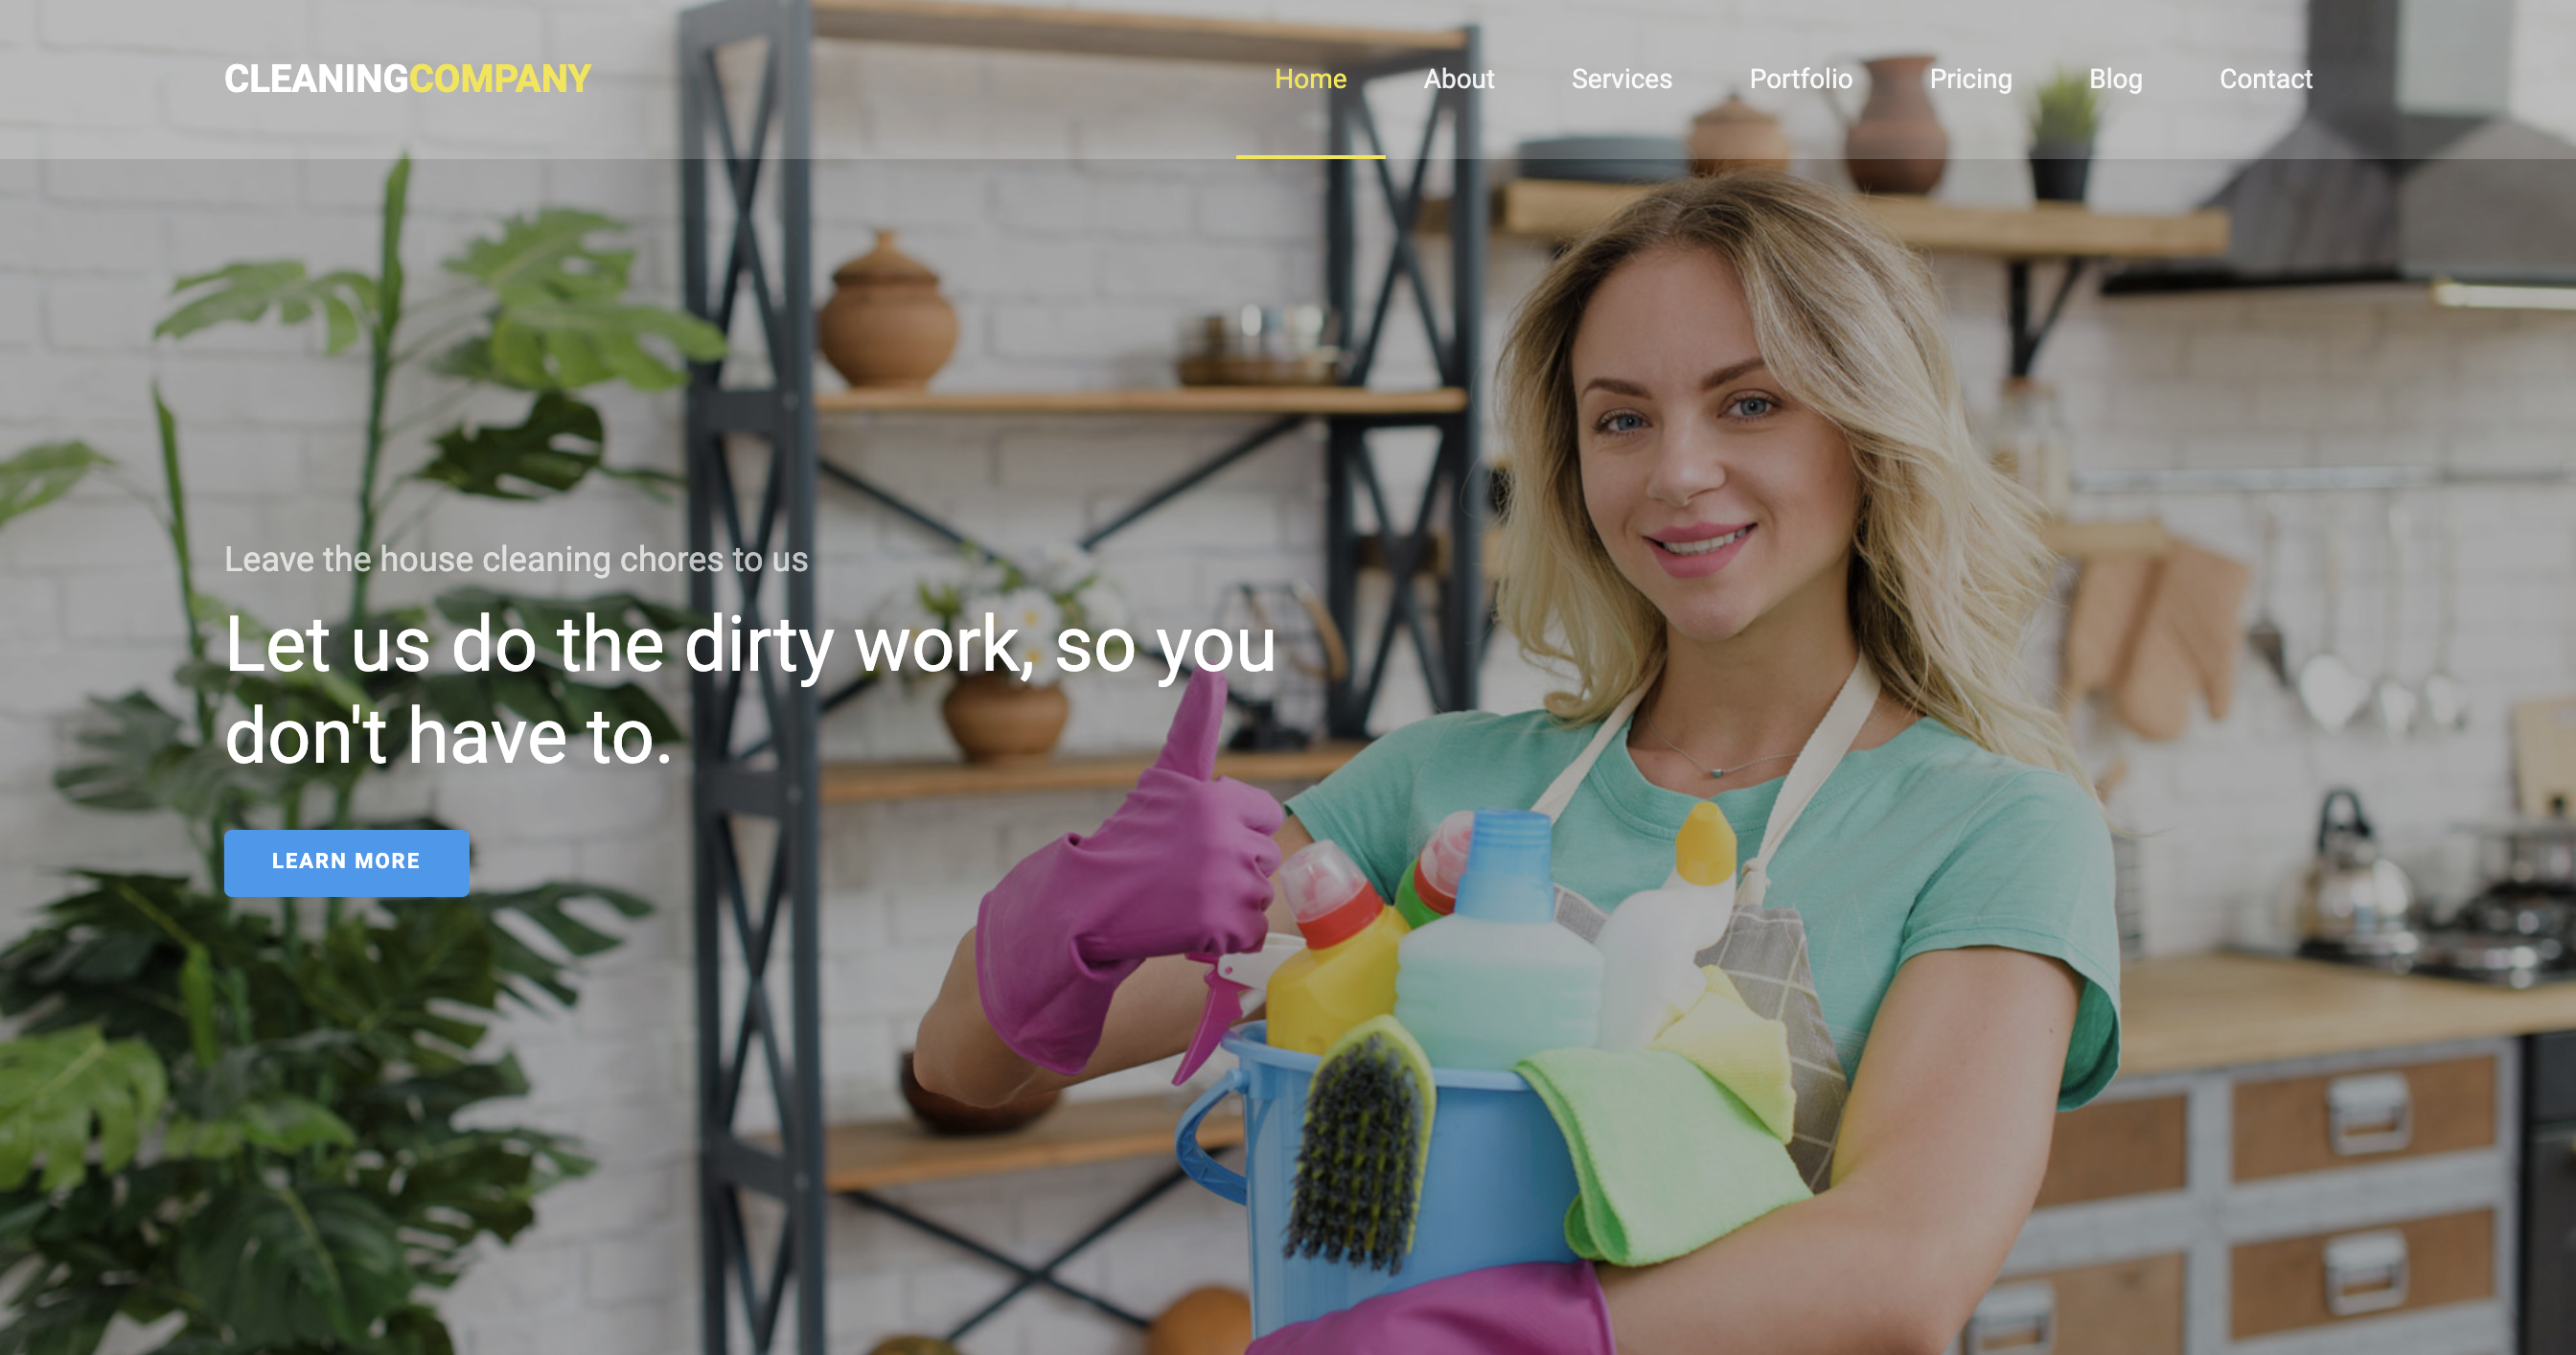 Cleaning Company – A CSS Template for Cleaning Service